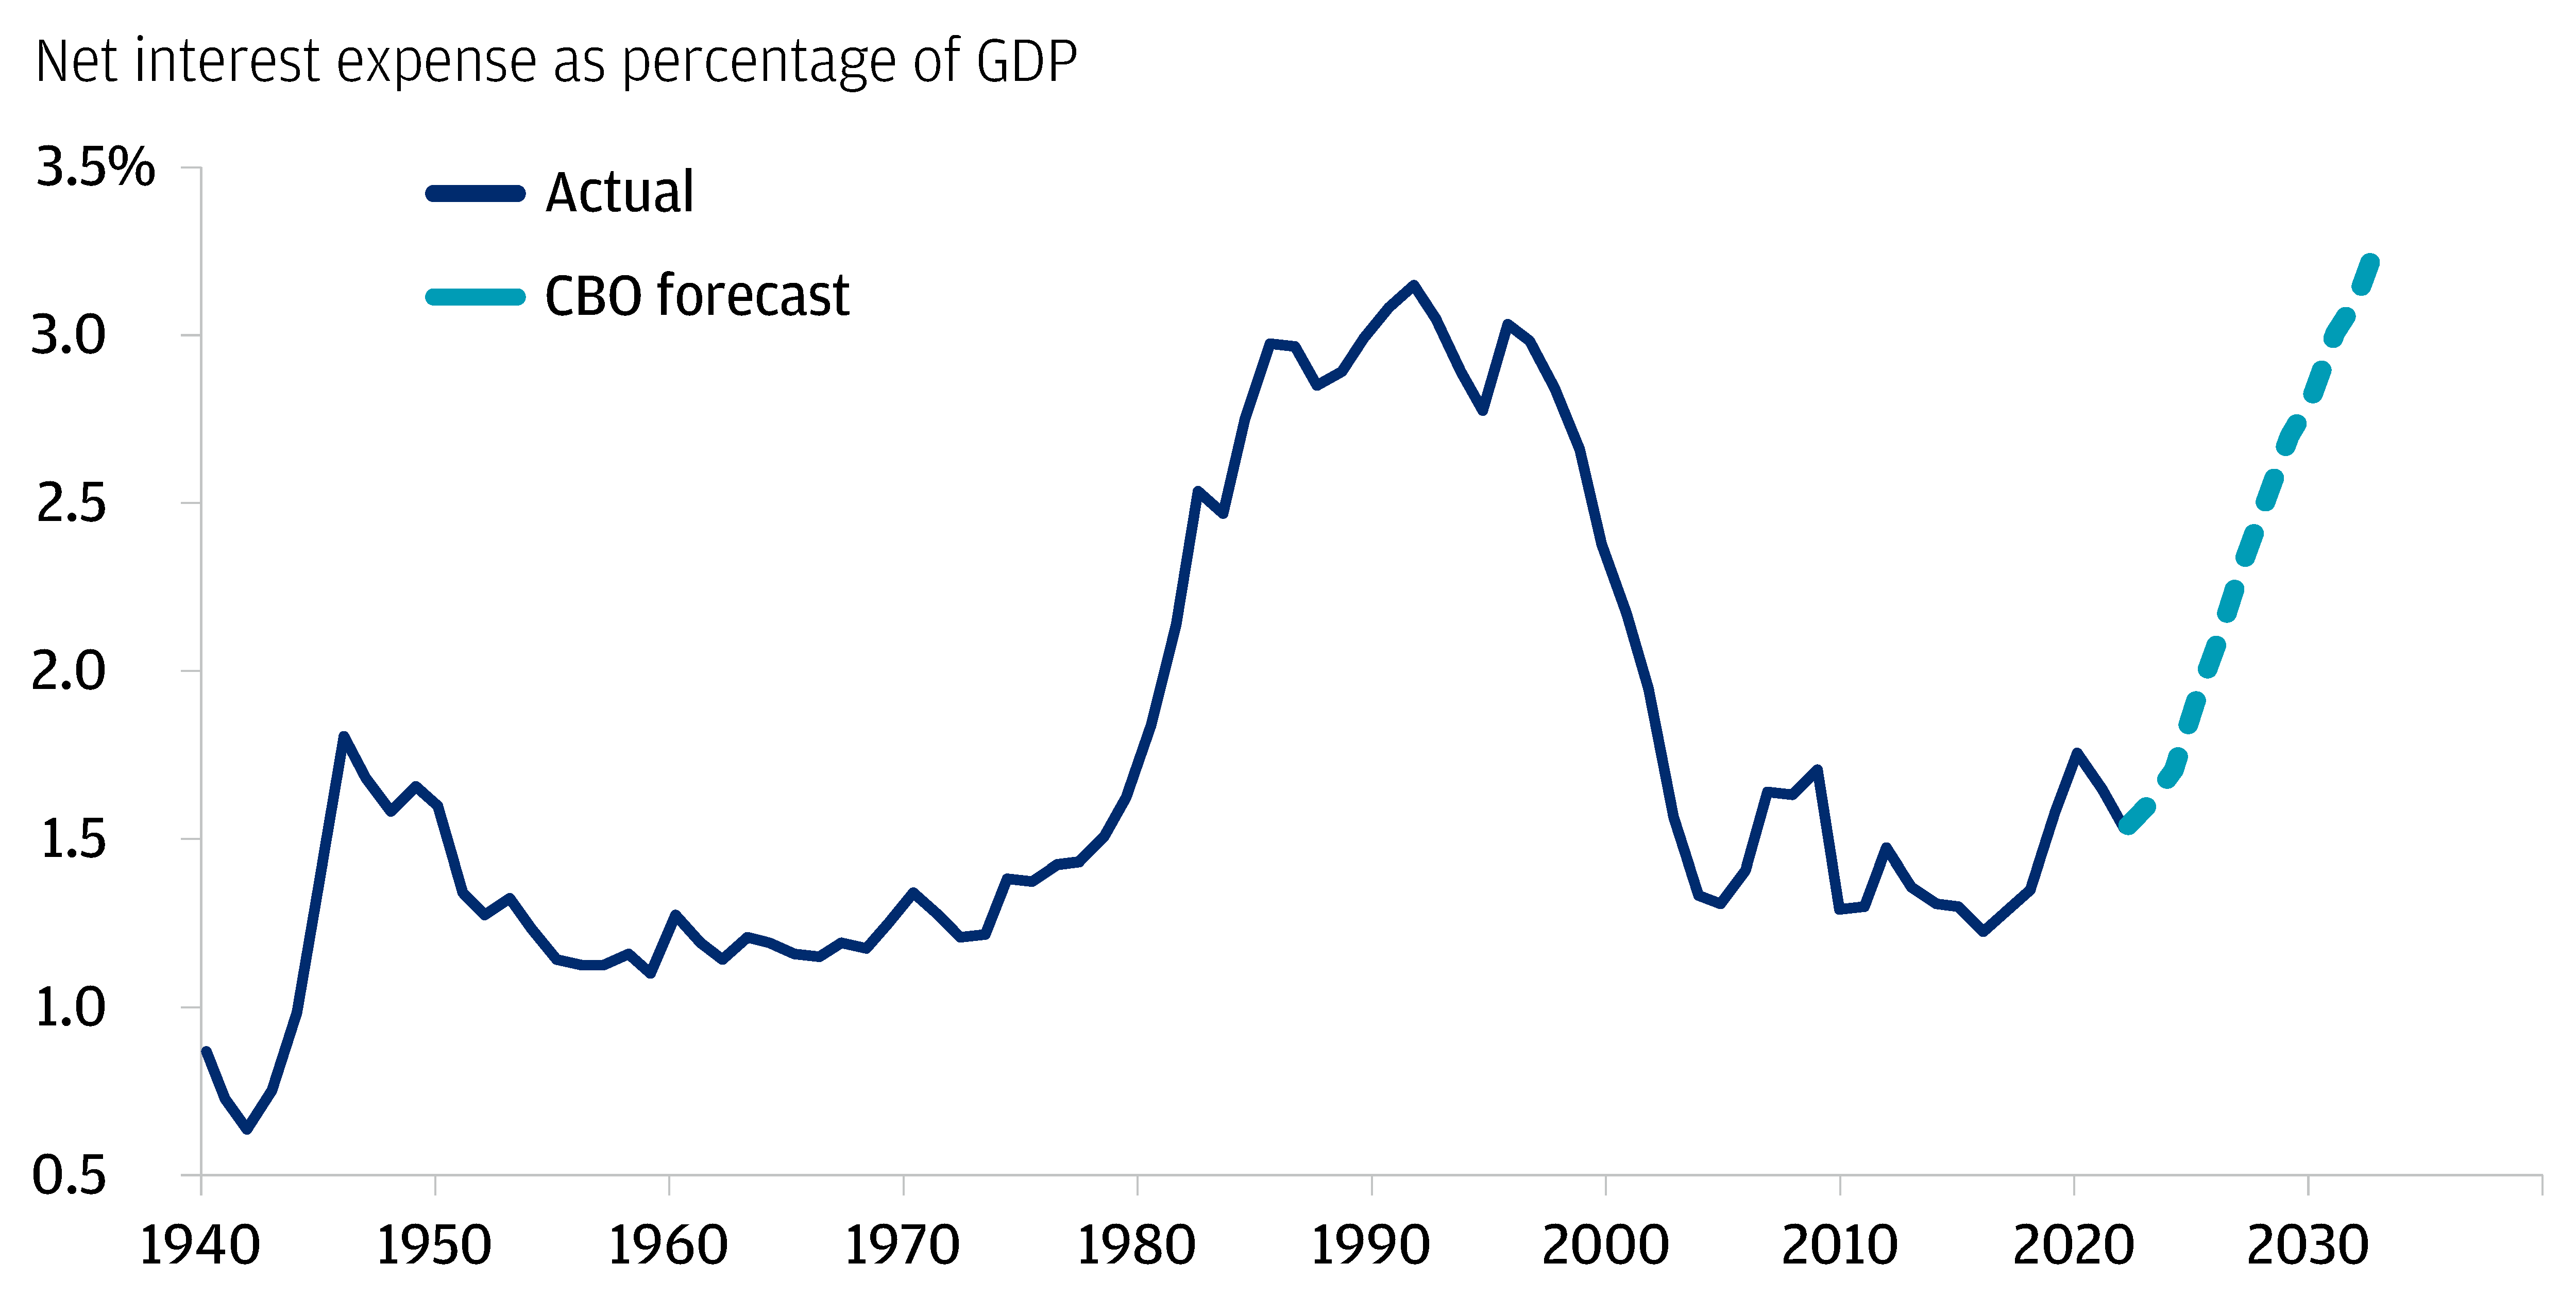 Net interest expense as percentage of GDP